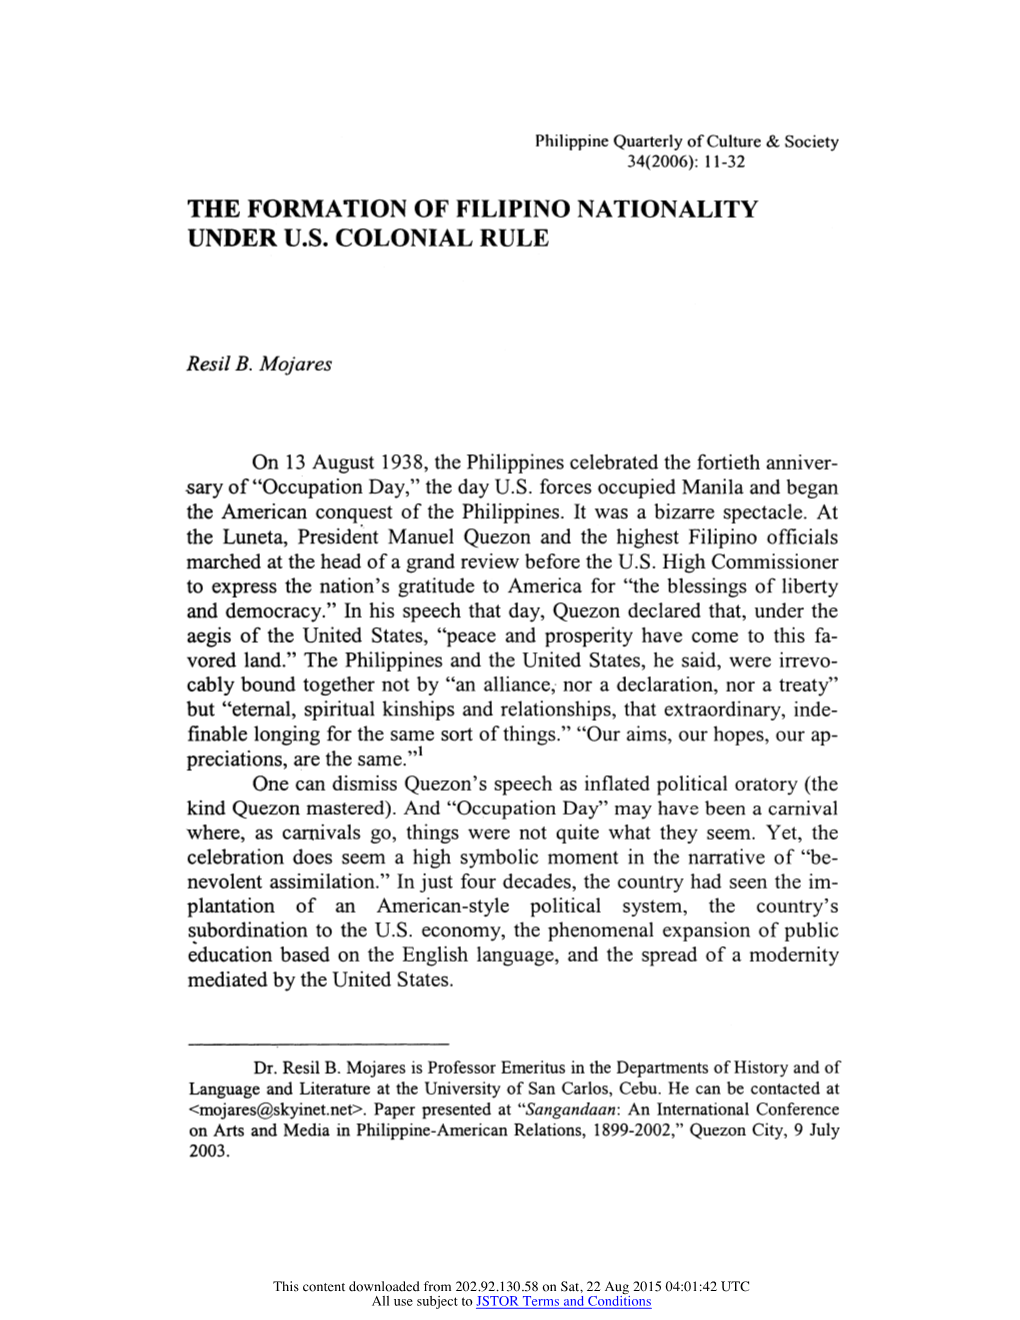 The Formation of Filipino Nationality Under U.S